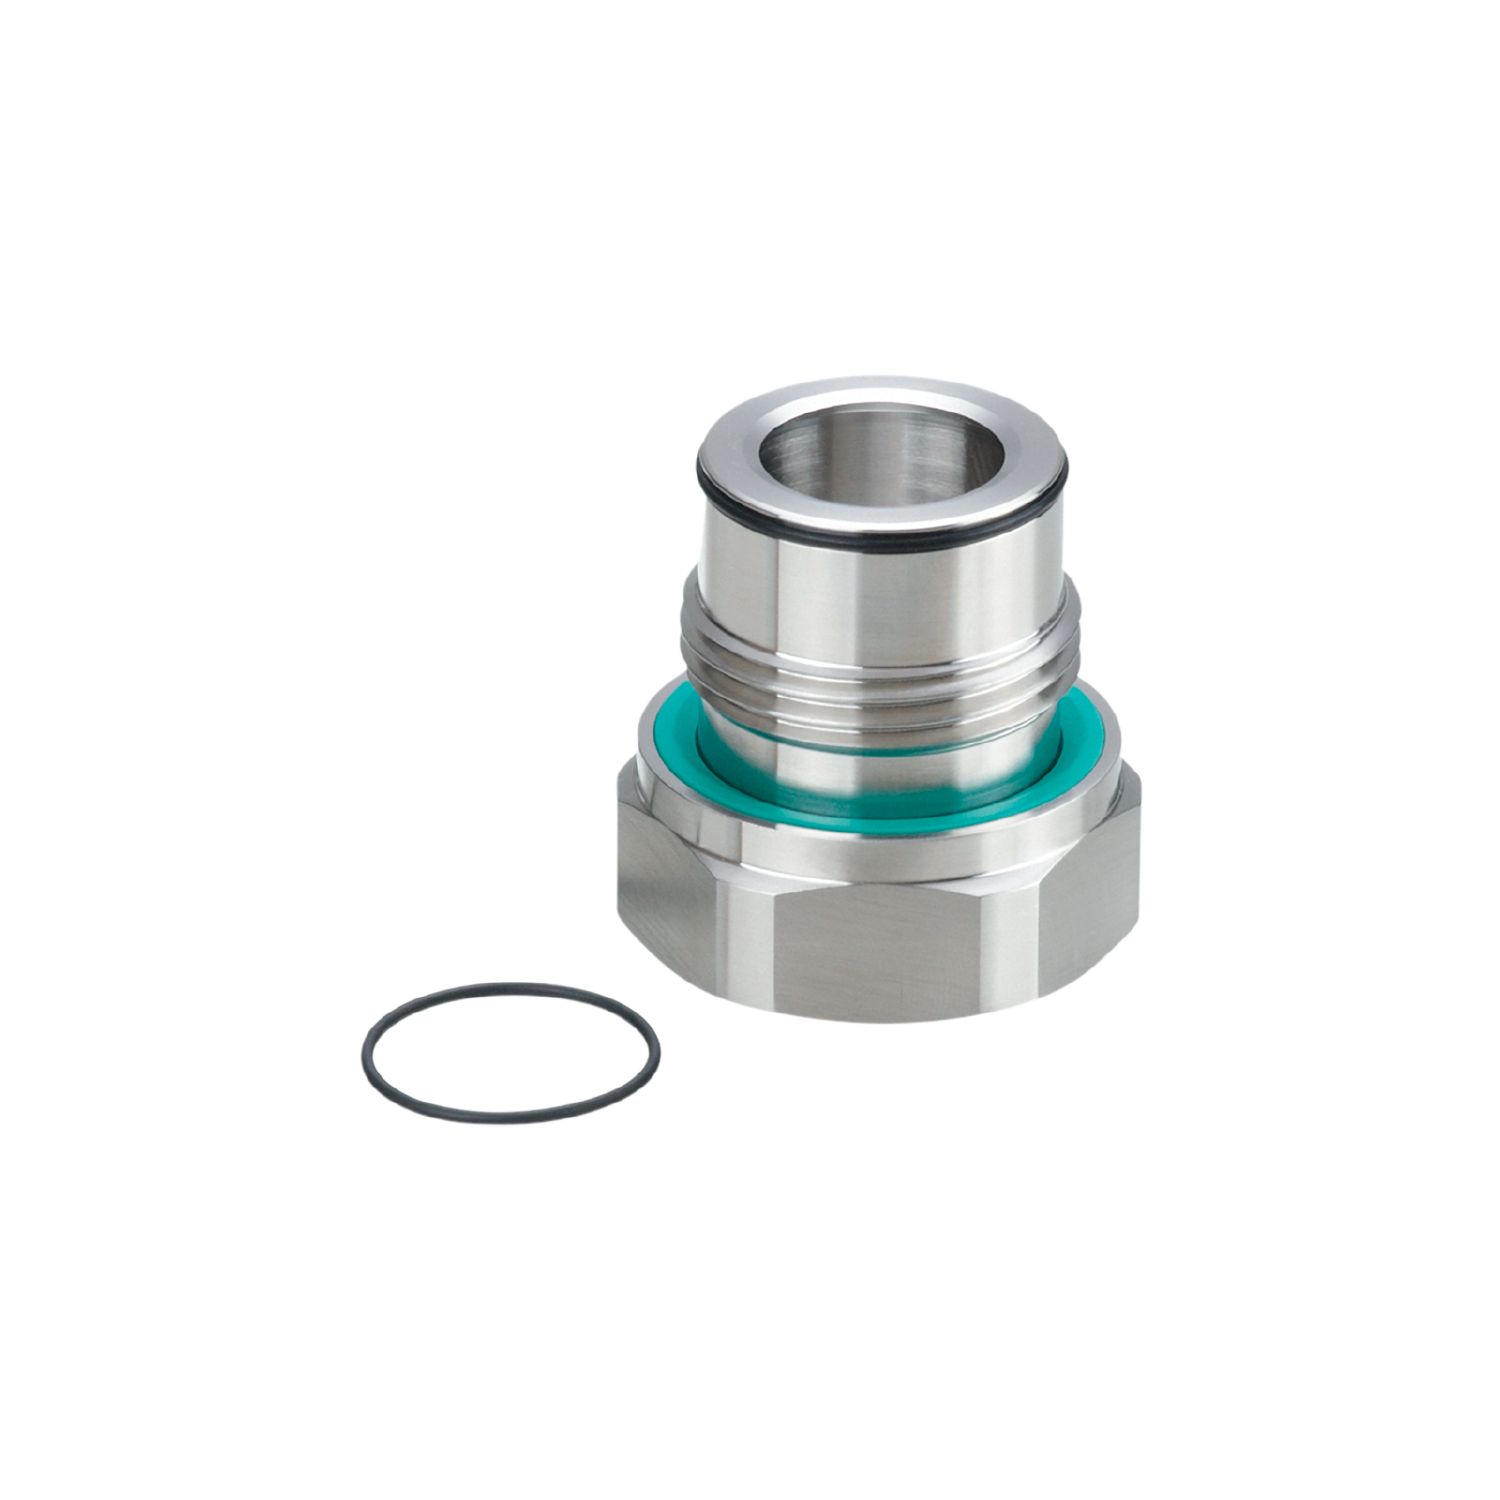 E30482 - Screw-in adapter for process sensors - ifm